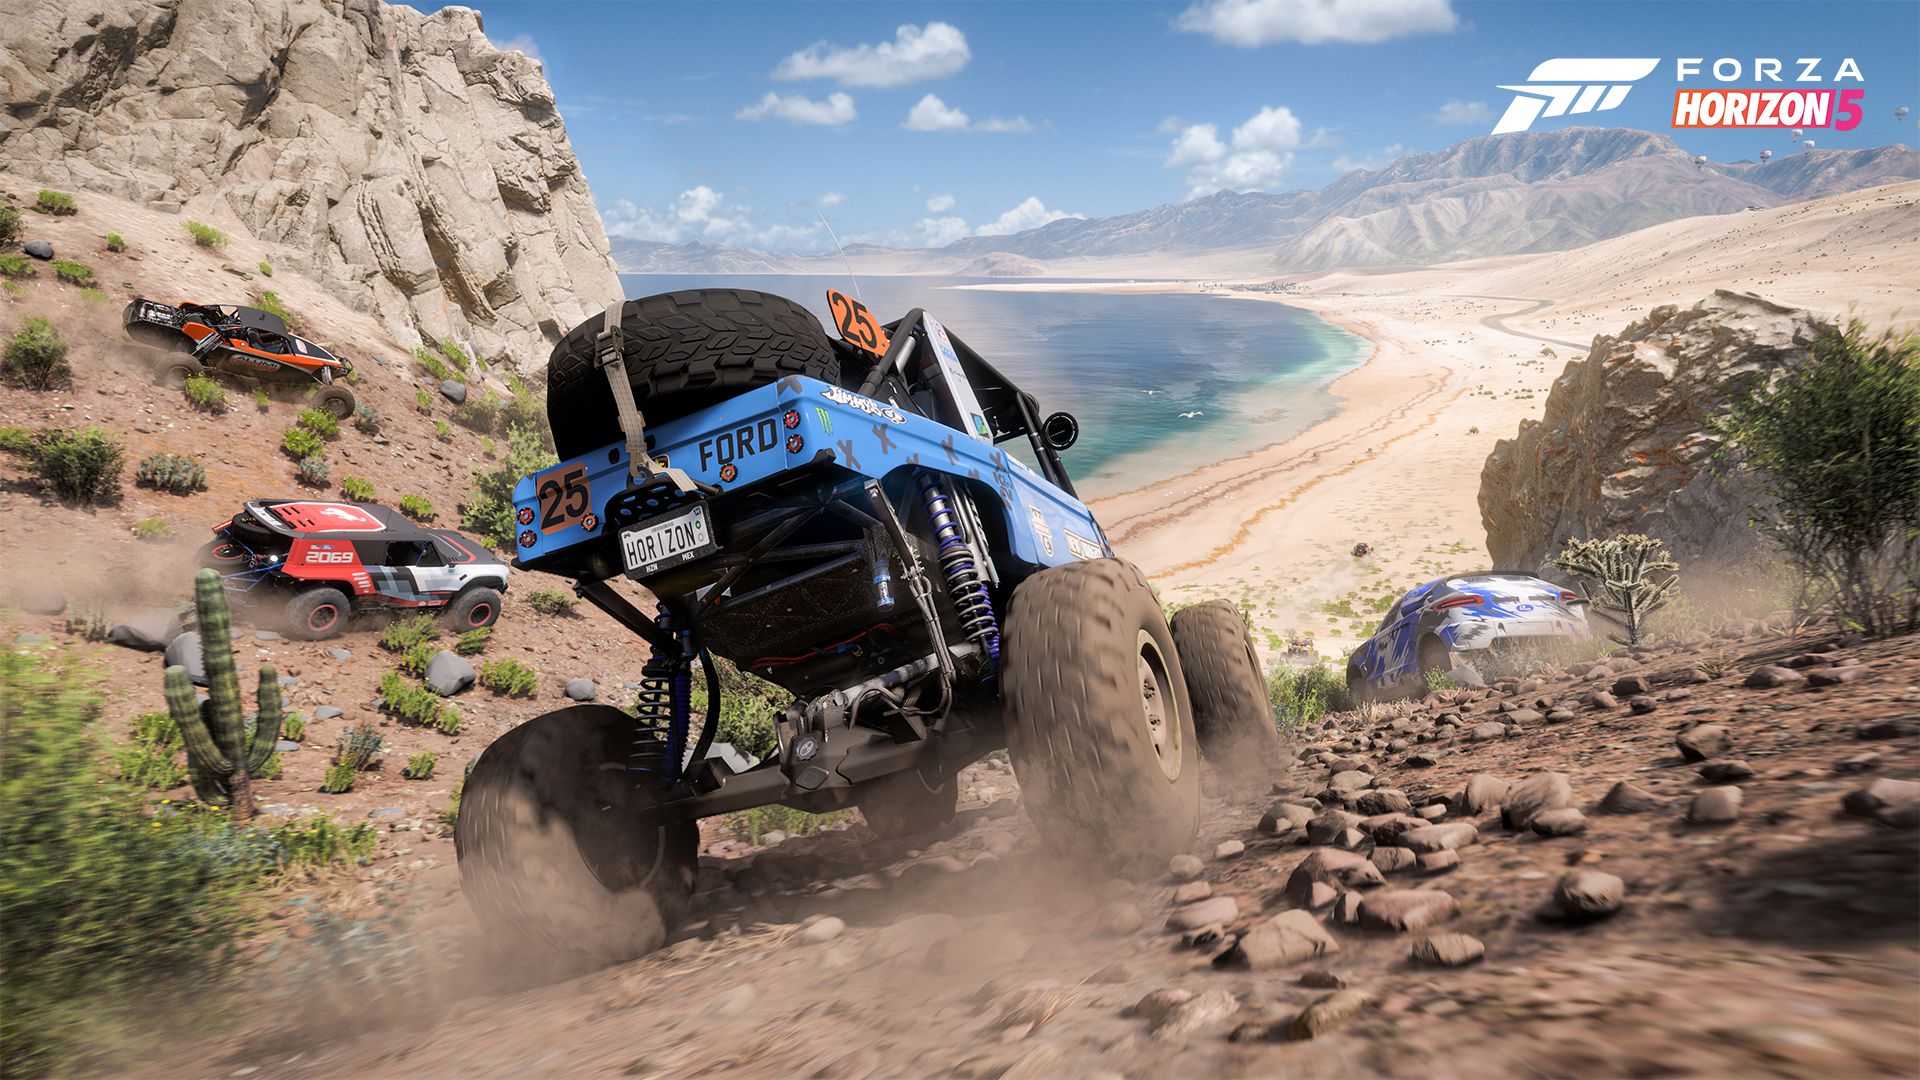 In the landscape of the Horizon Mexico Festival, four off-road vehicles speed down rocky desert hills toward a sandy beach on a clear, sunny day.